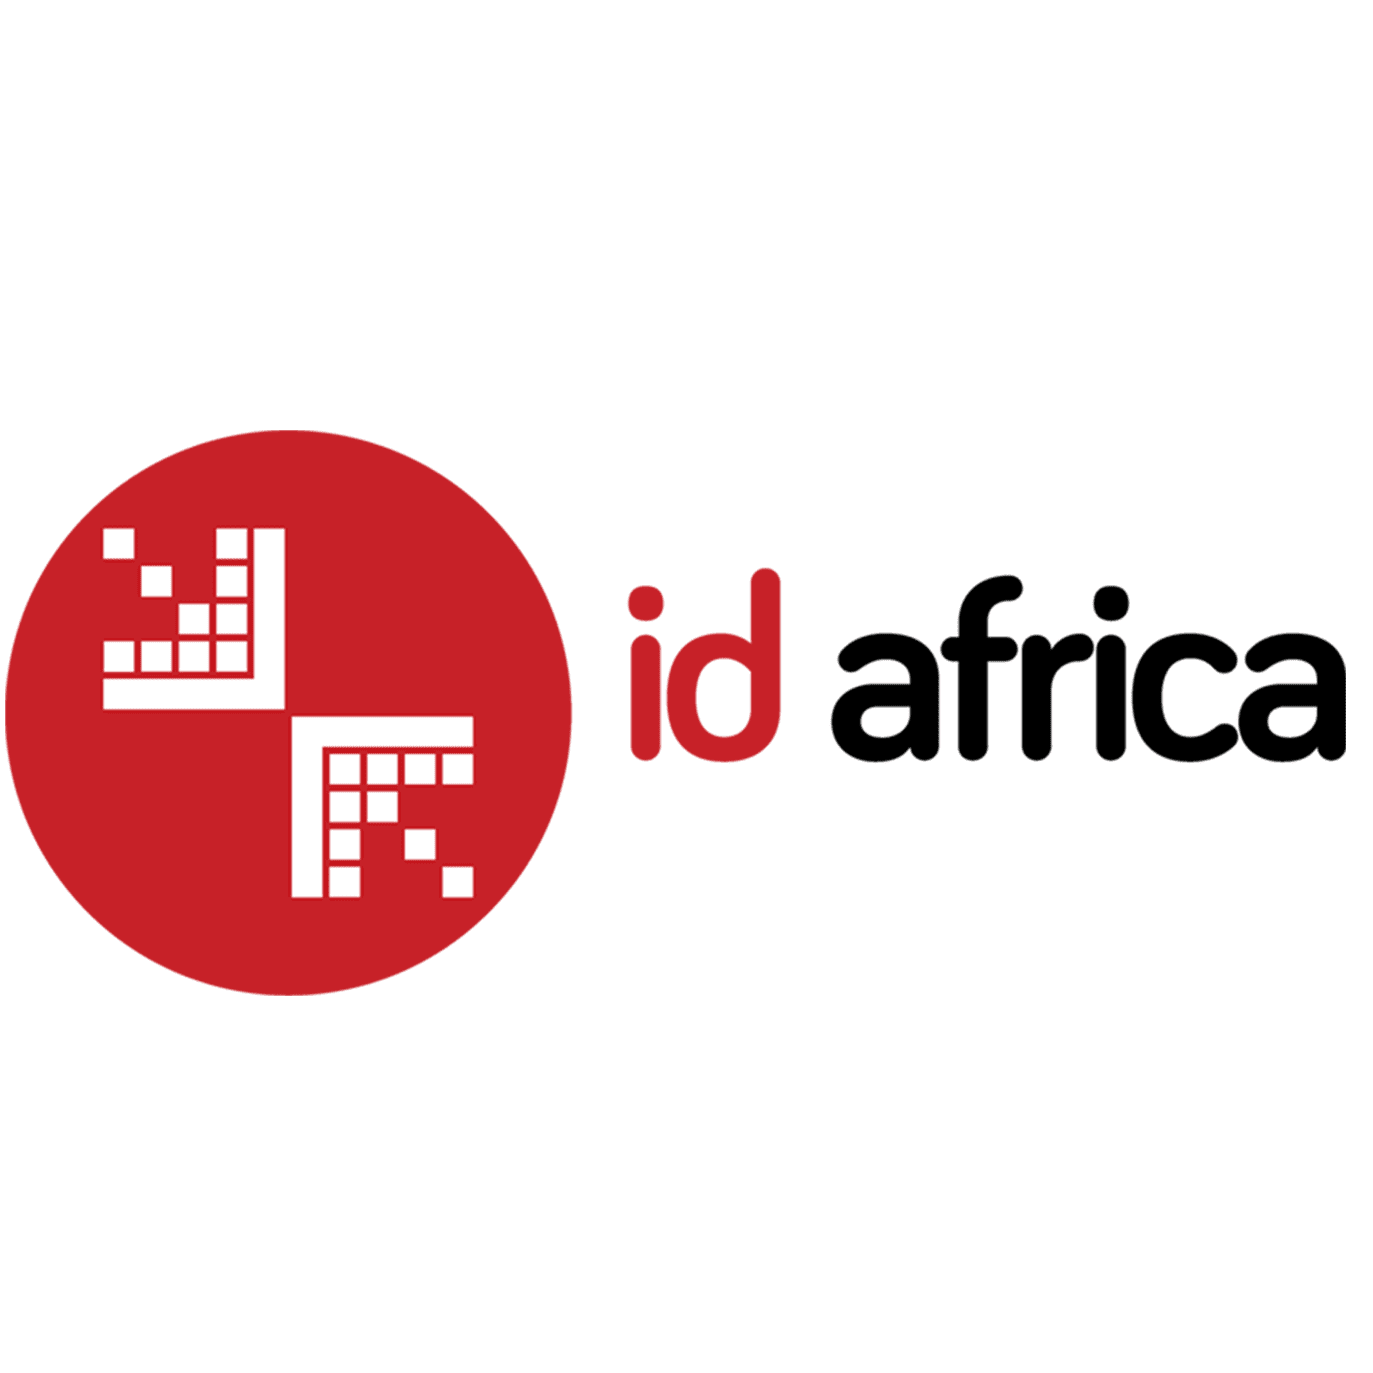 id africa logo with red circle on white background